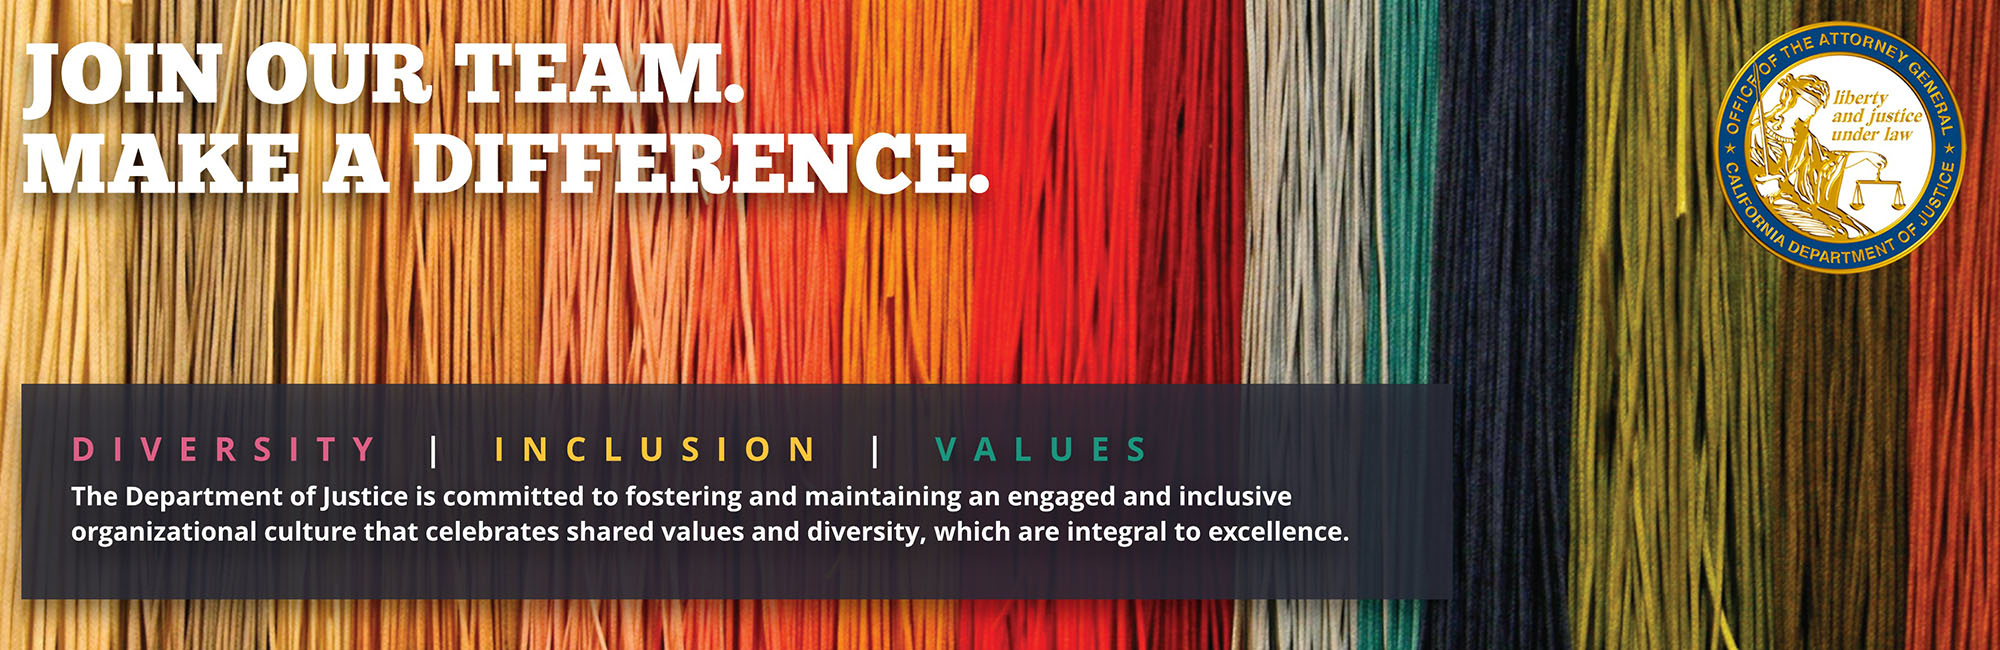 The Department of Justice is committed to fostering and maintaining an engaged and inclusive organizational culture that celebrates shared values and diversity, which are integral to excellence.